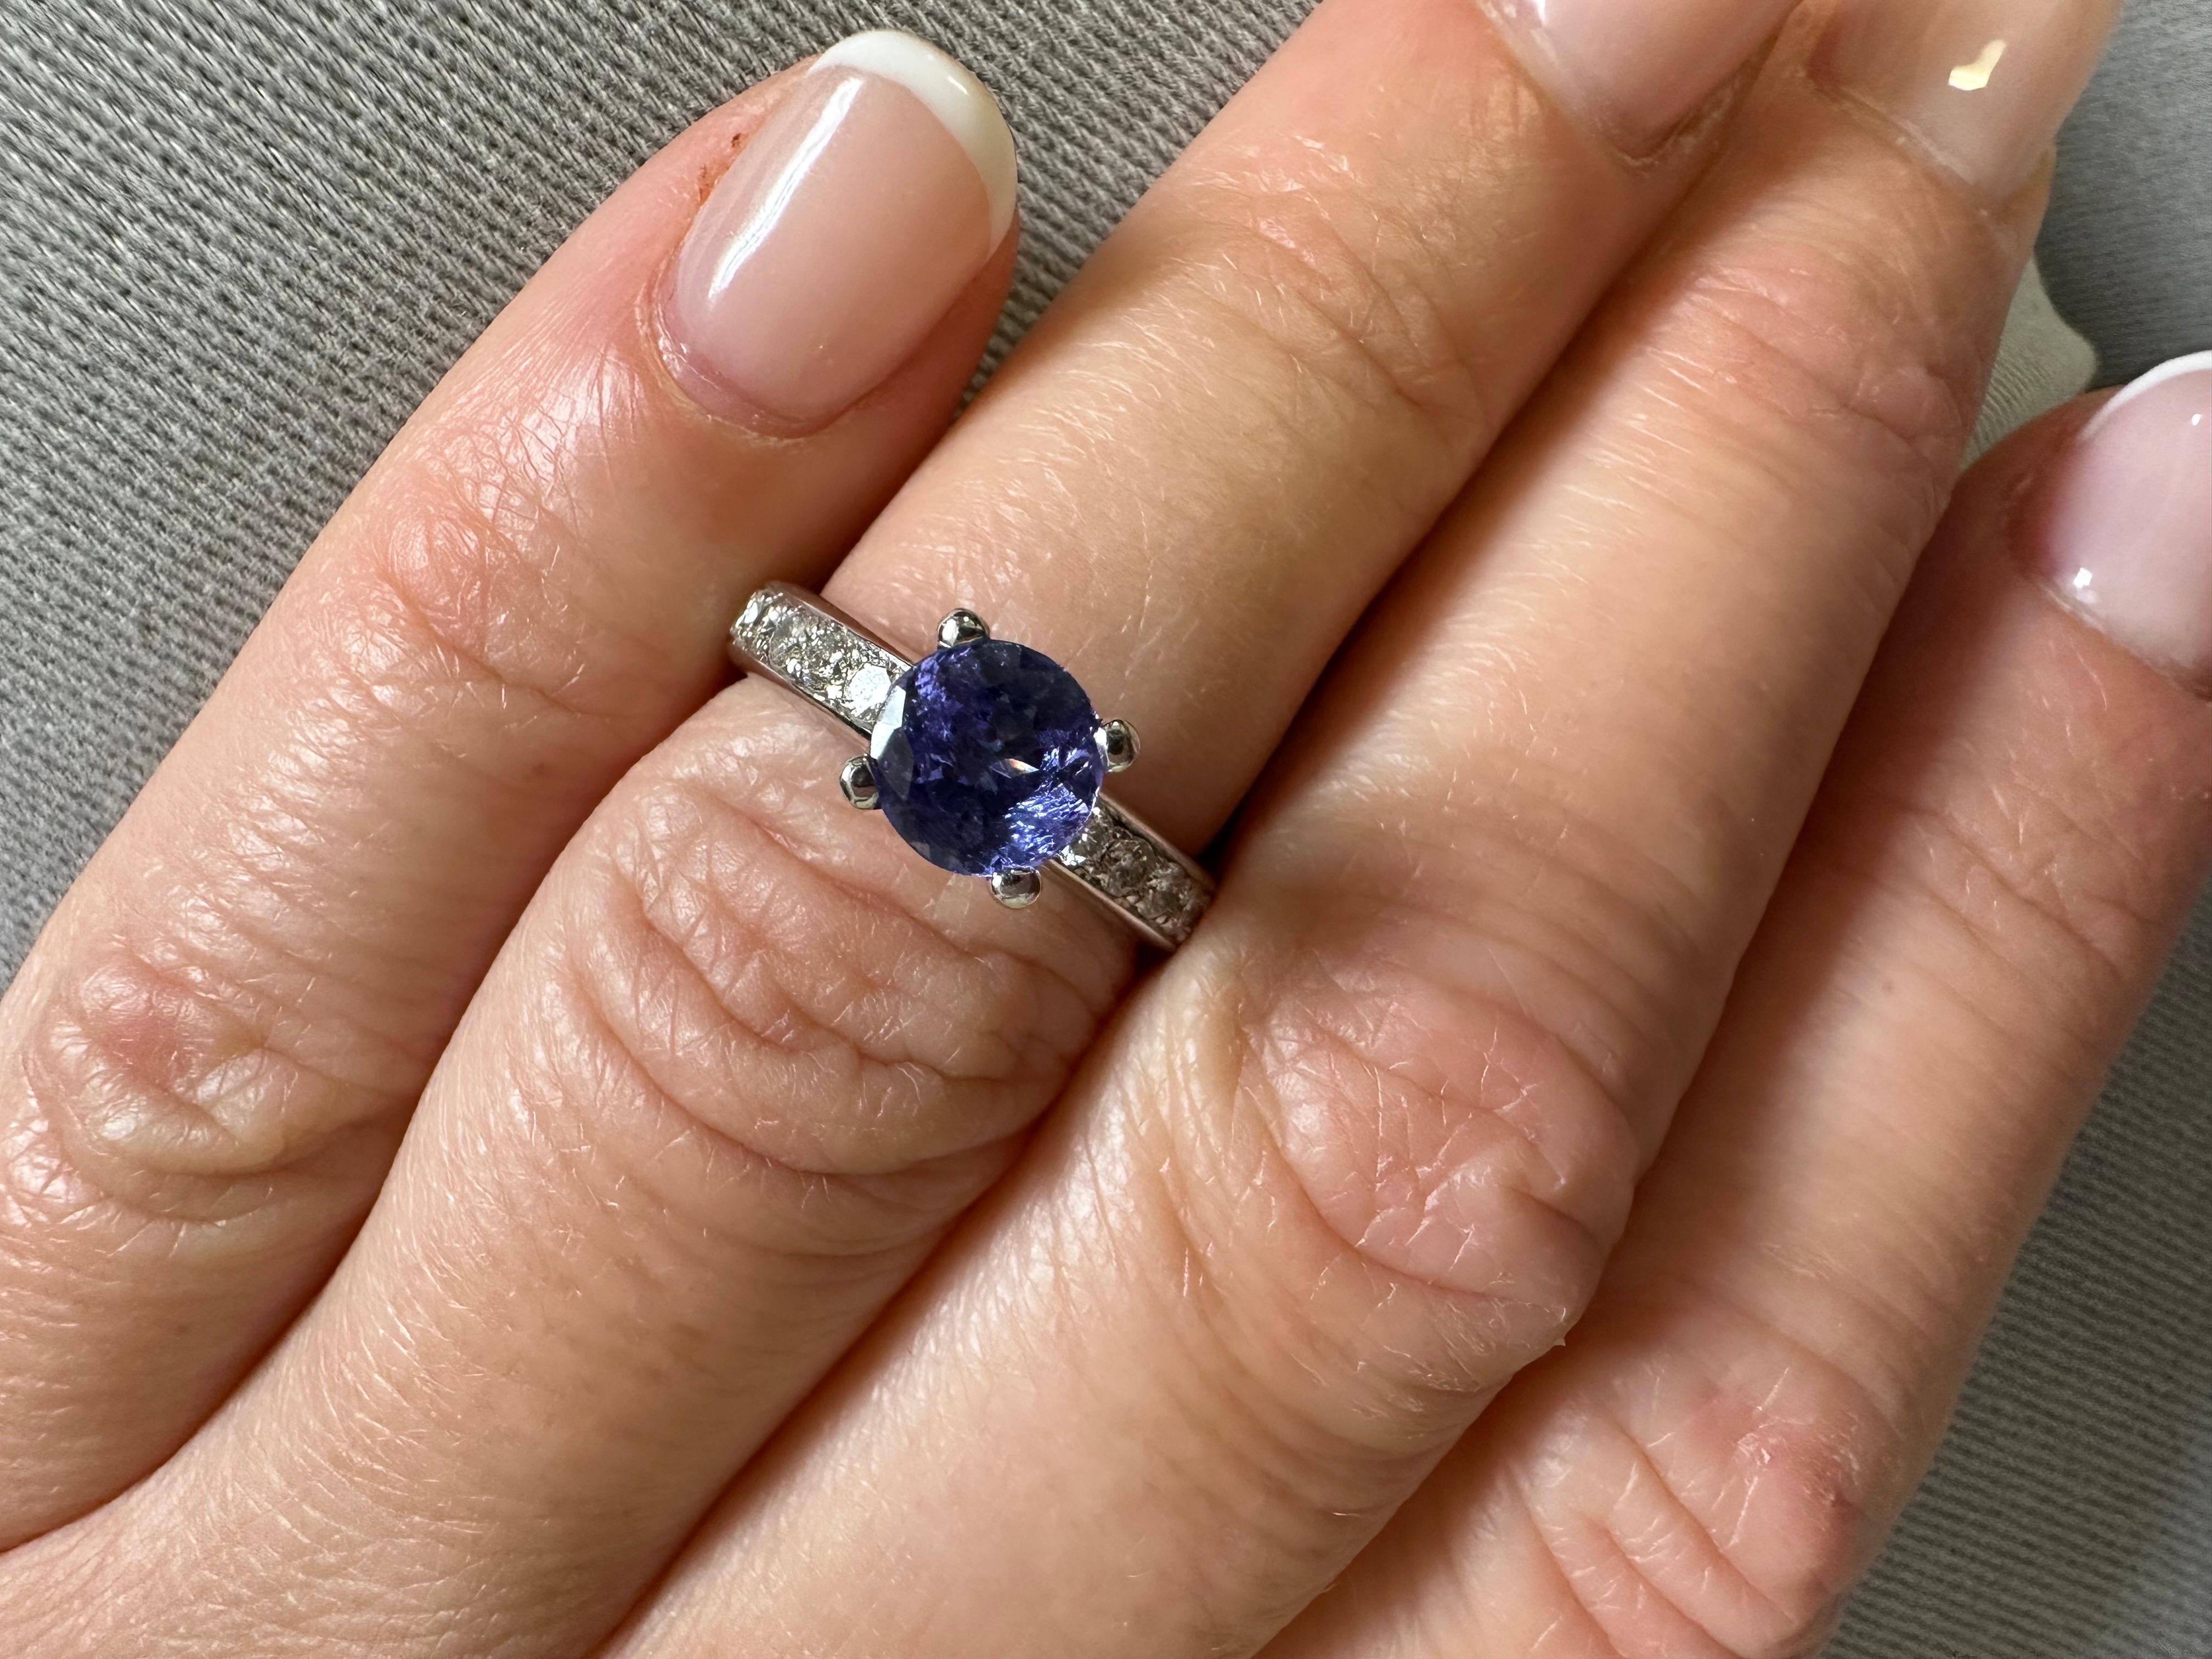 Stunning engagement ring made with 1ct tanzanite and natural diamonds in 14KT gold.

Metal Type: 14KT

Natural Tanzanite(s):
Color: Violet
Cut: Round
Carat: 1ct
Clarity: Moderately Included

Natural Diamond(s): 
Color: F-G-H
Cut:Round